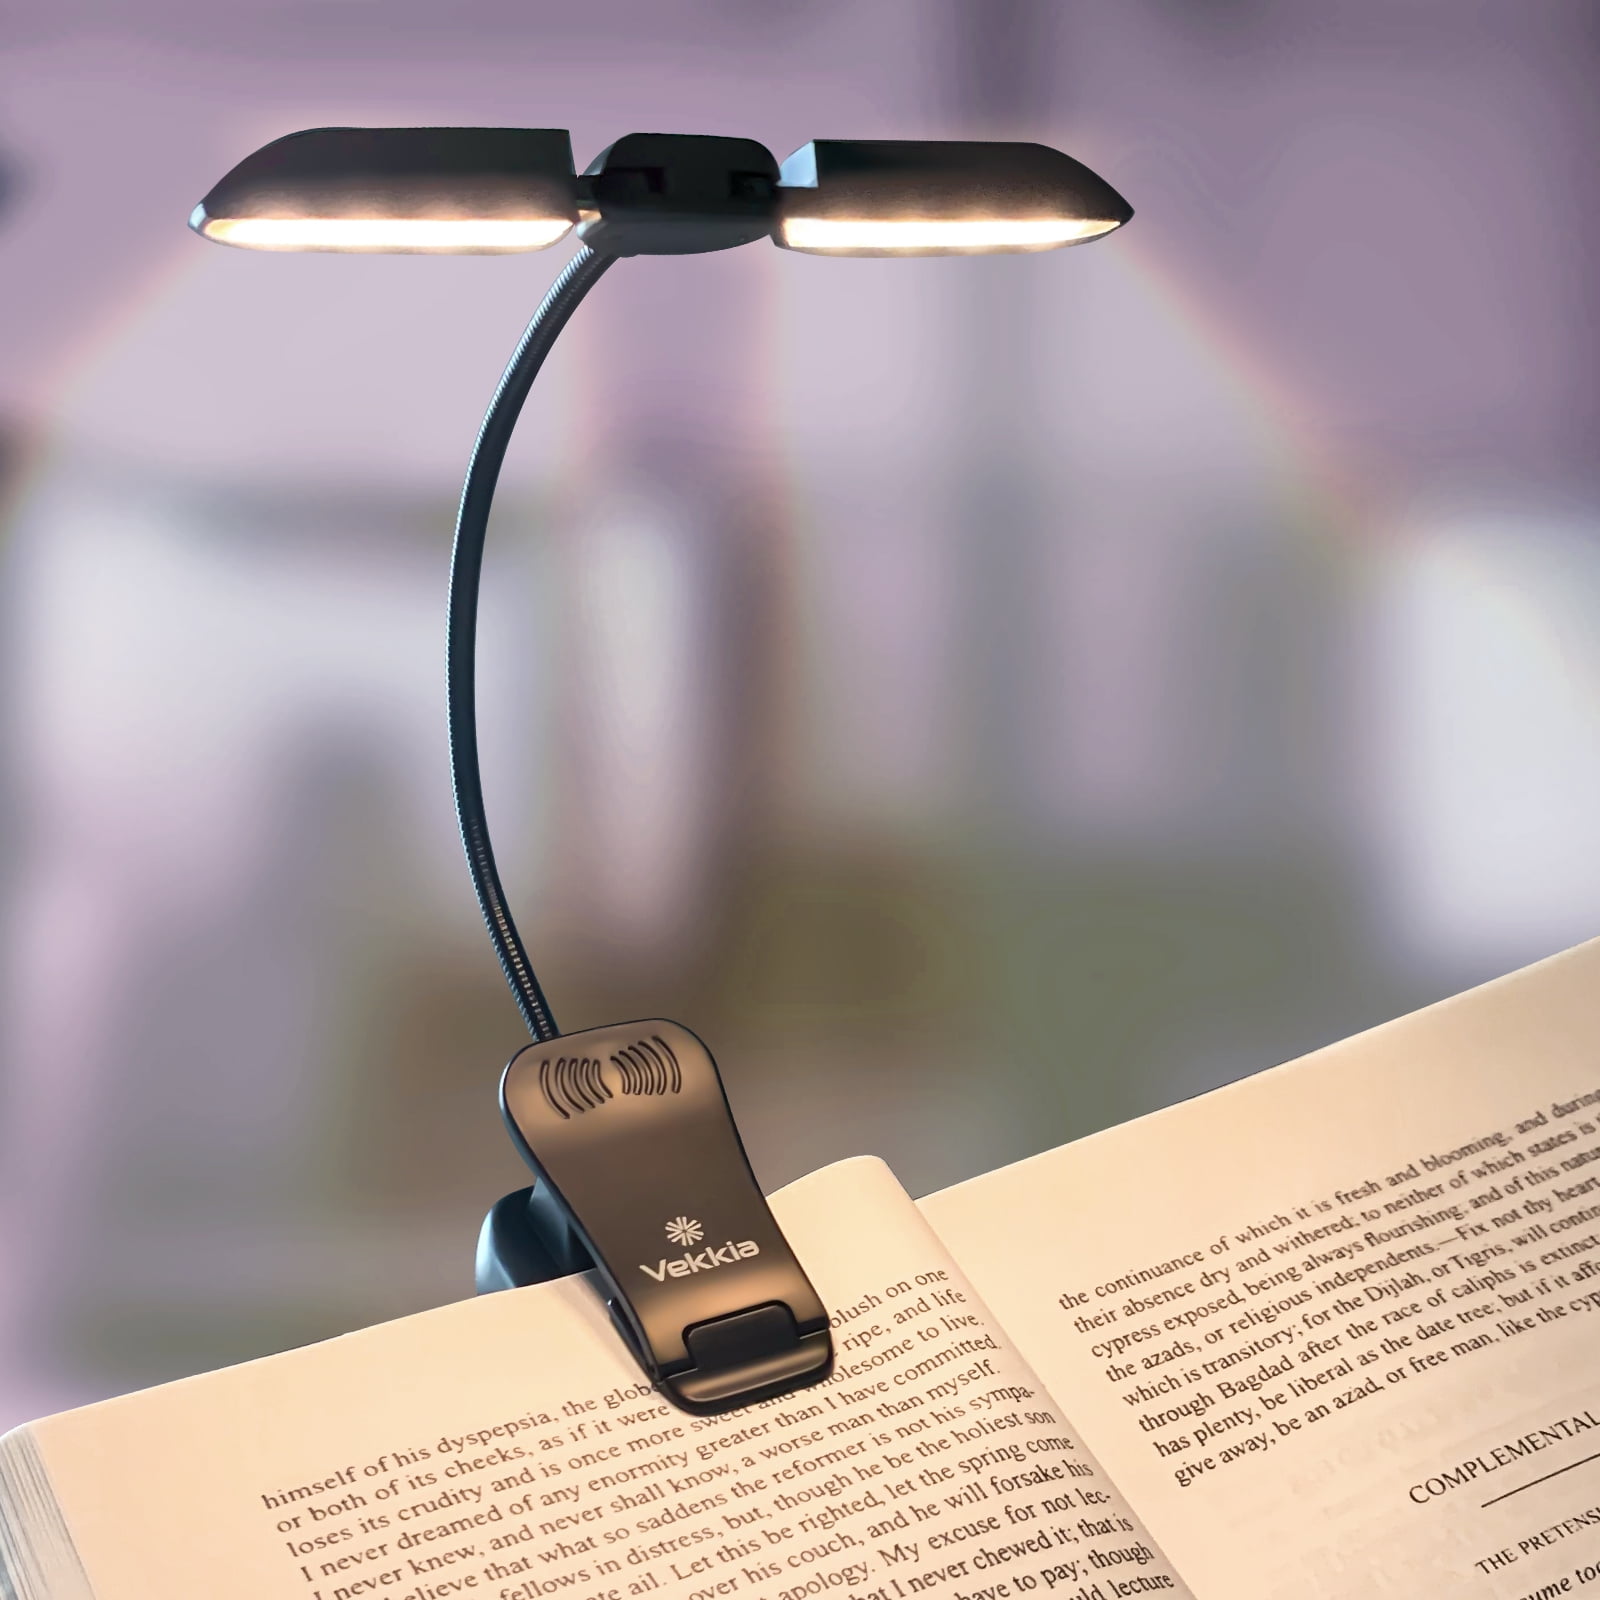 Vekkia Bookmark Book Lights for Reading，Reading Lights for Books in Bed With Updated Clip Light and Built-in USB Cable Soft Eye-care Light The best choice for book lovers. Stepless Dimming 